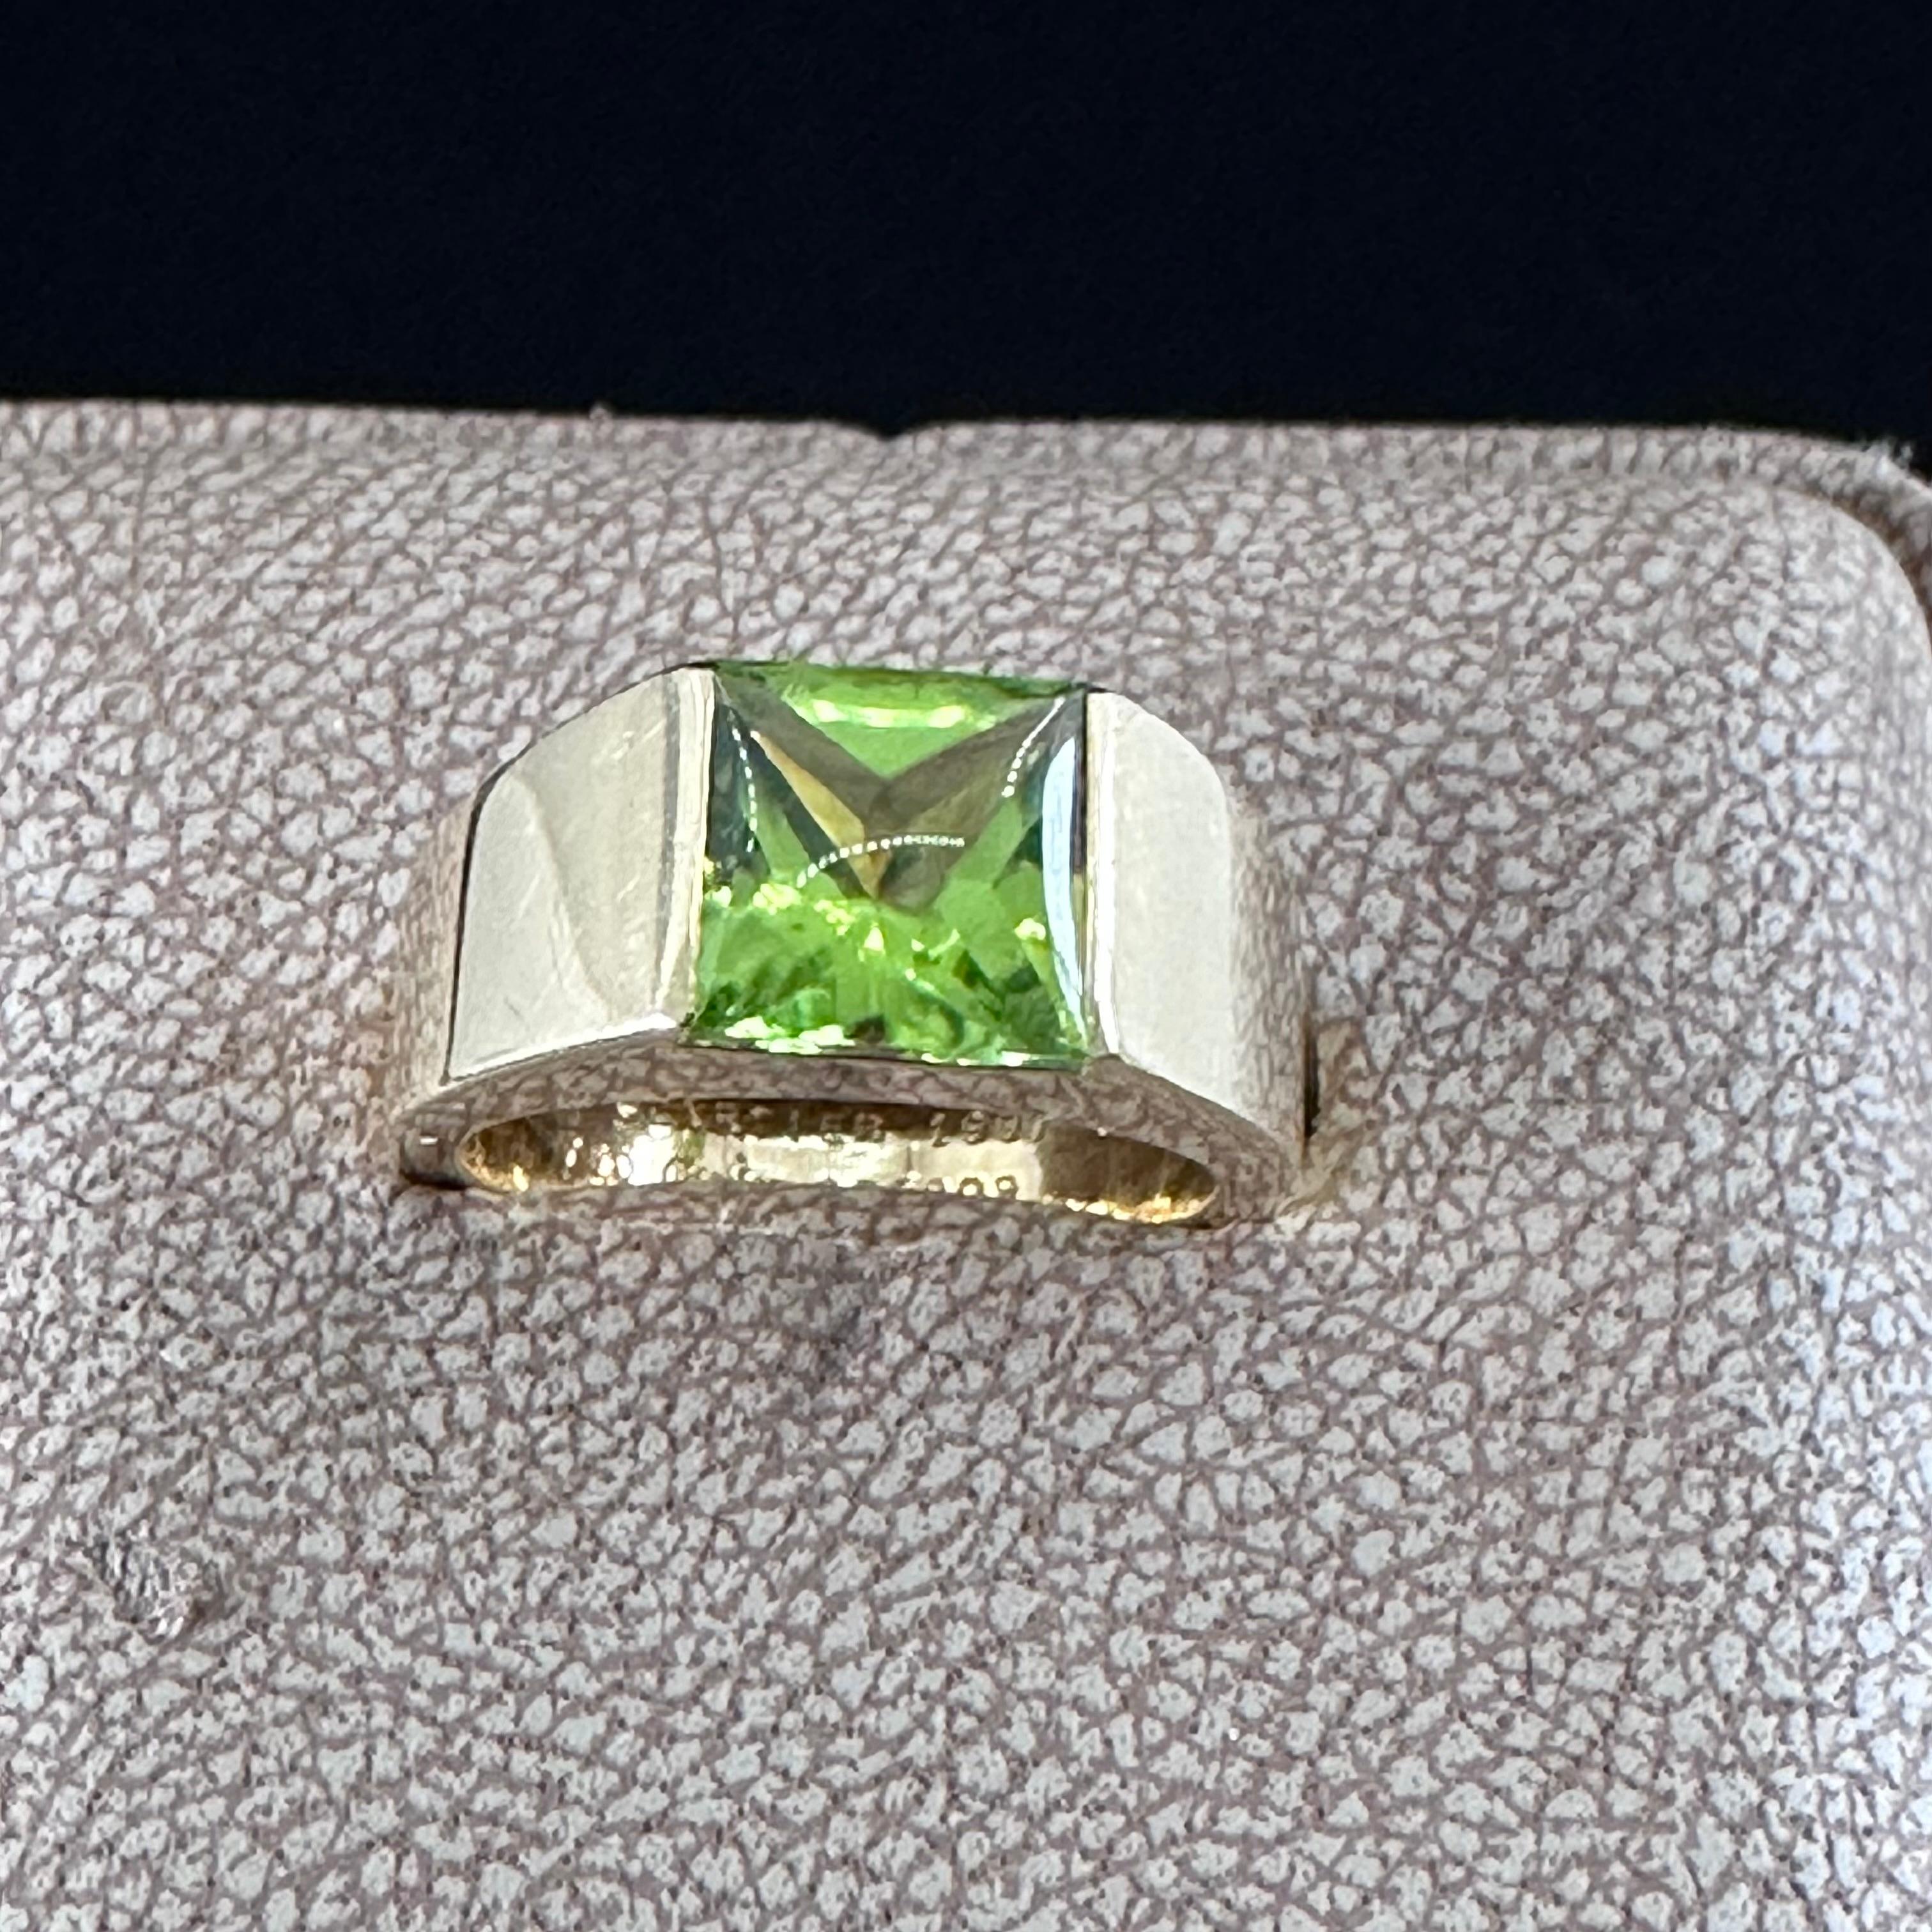 Vintage Cartier Vivid Peridot Tank Band Ring 
Size: 51
1997 Cartier French Hallmarks 750 
The iconic tank ring.
Square Cabochon Peridot Set Open Tension Setting.
Handsome Made in France
18 k Yellow  Gold 
Geometric Band Ring
Dimensions of the